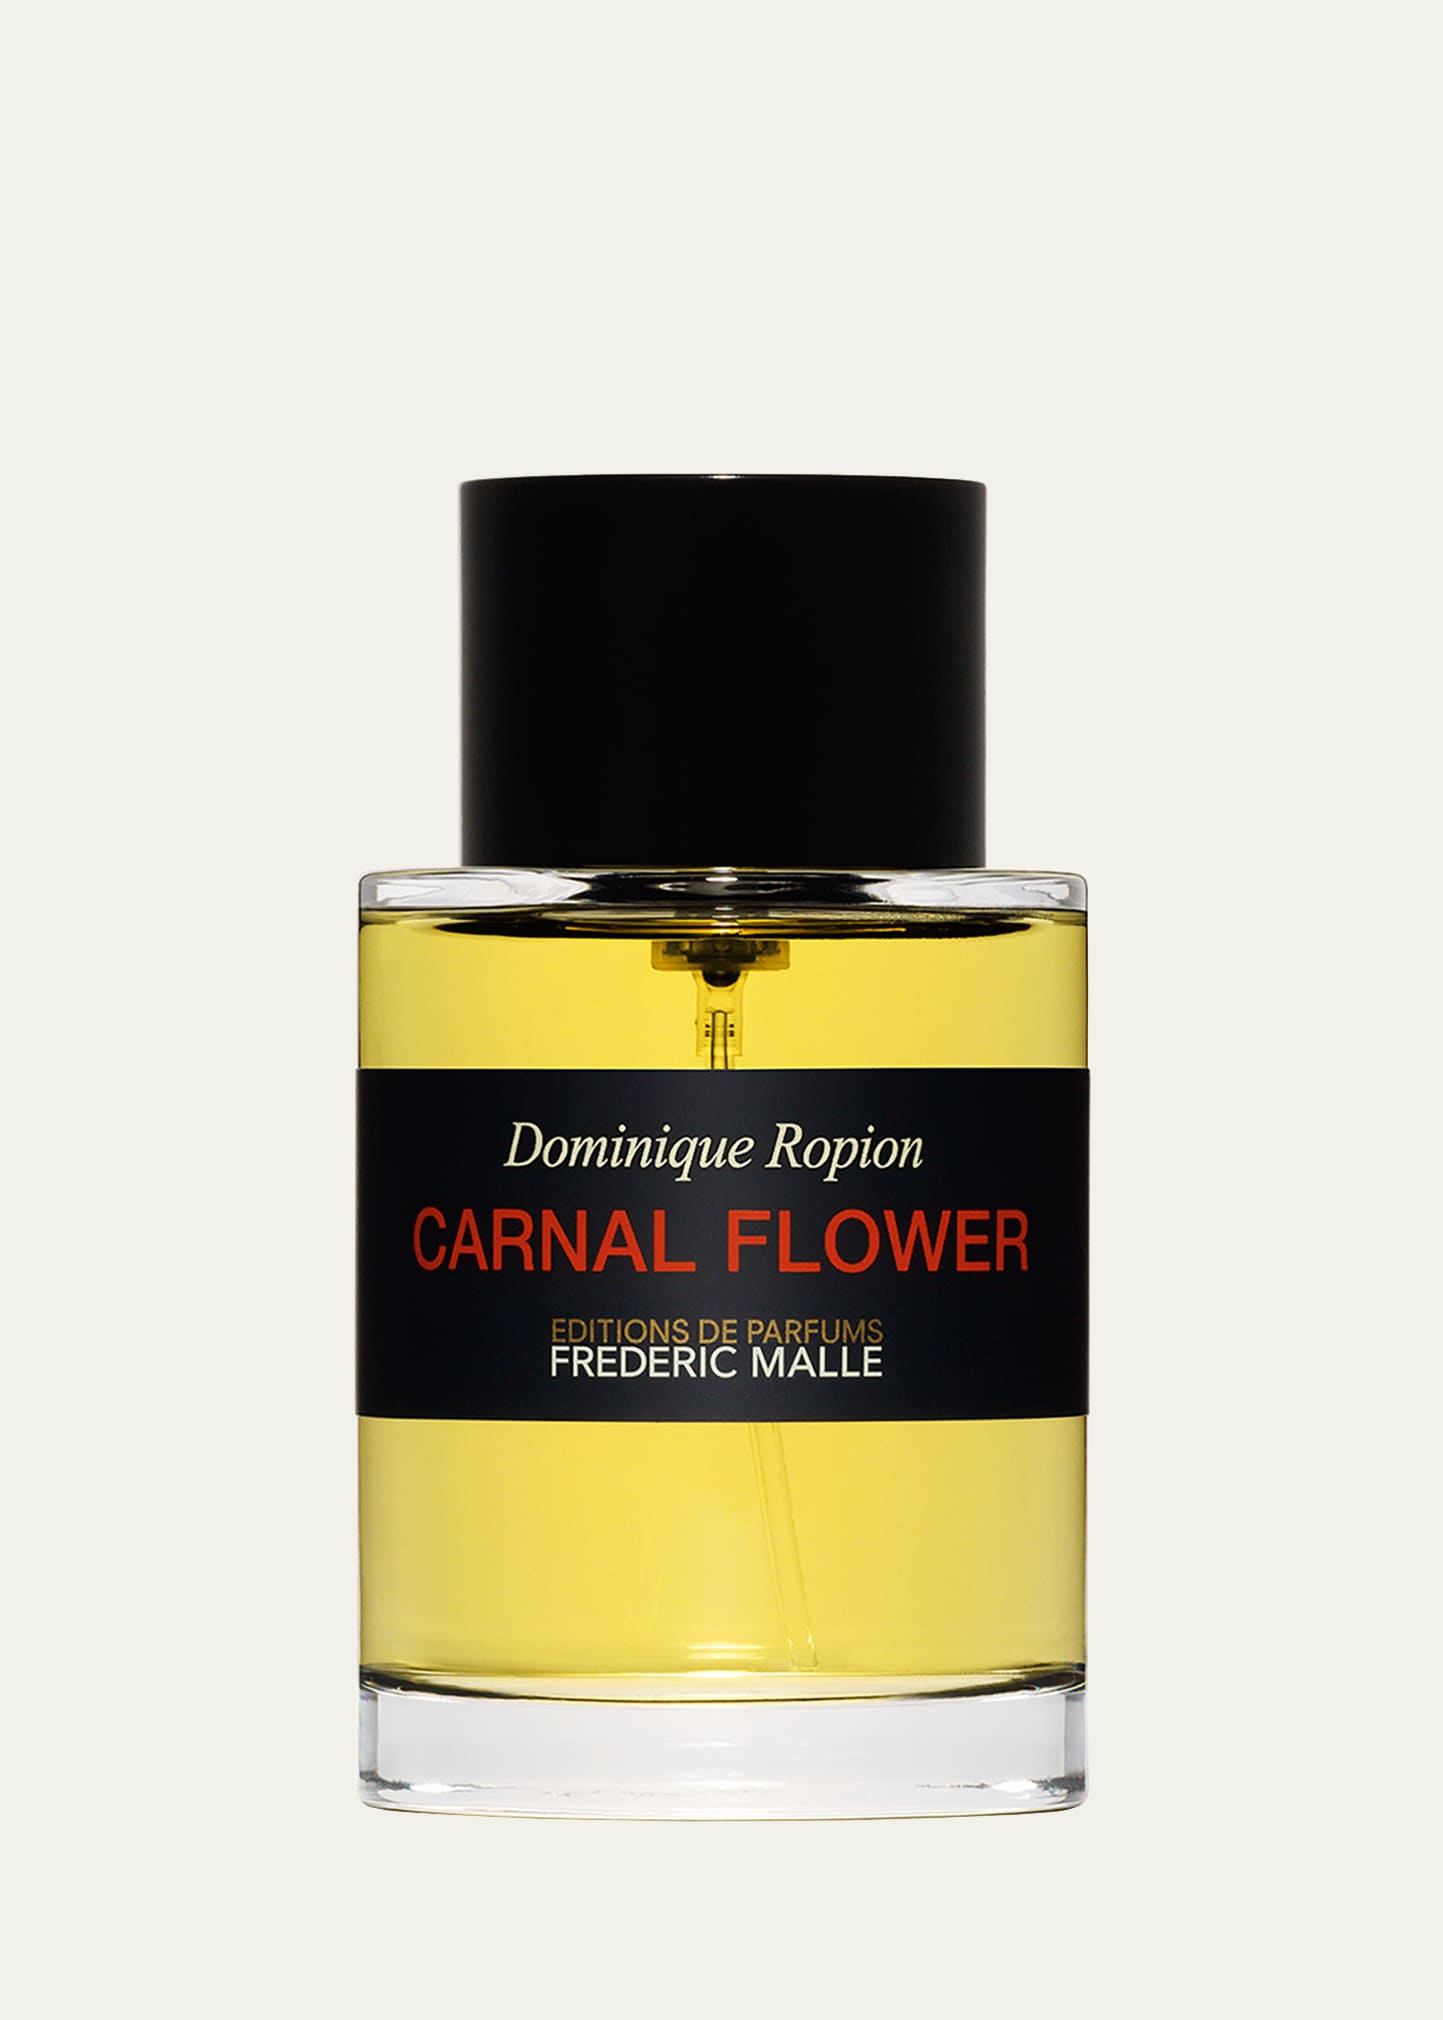 Editions De Parfums Frederic Malle Carnal Flower Perfume, 3.4 Oz./ 100 ml In White